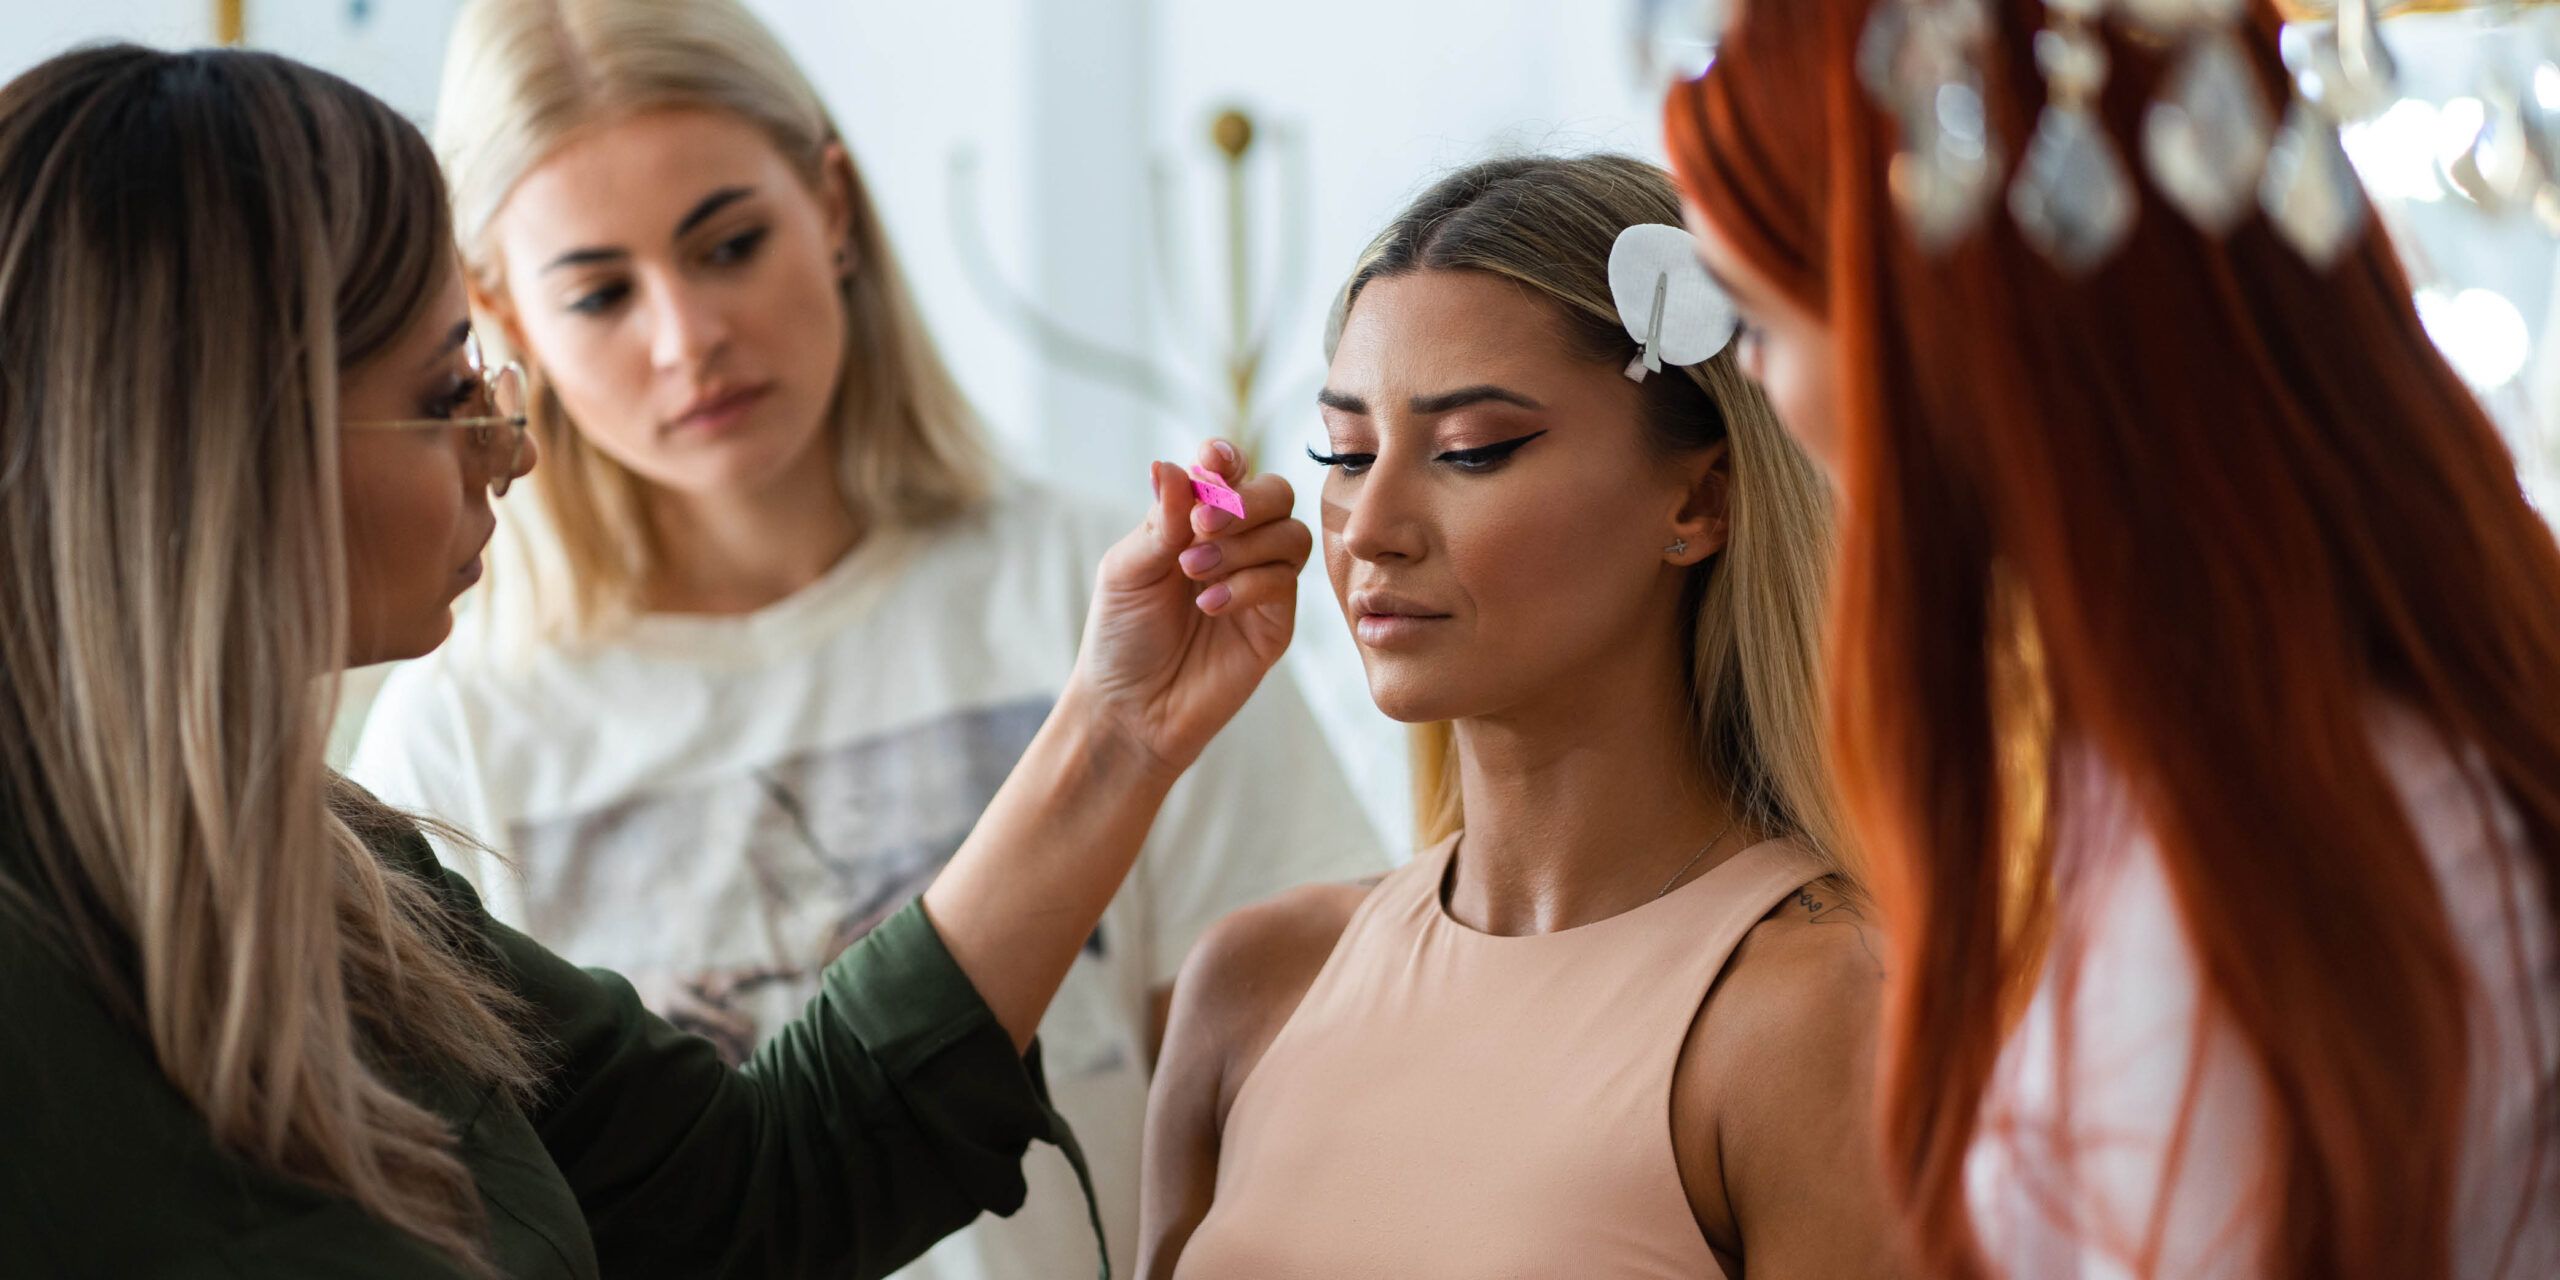 How to get job the beauty industry - FutureLearn